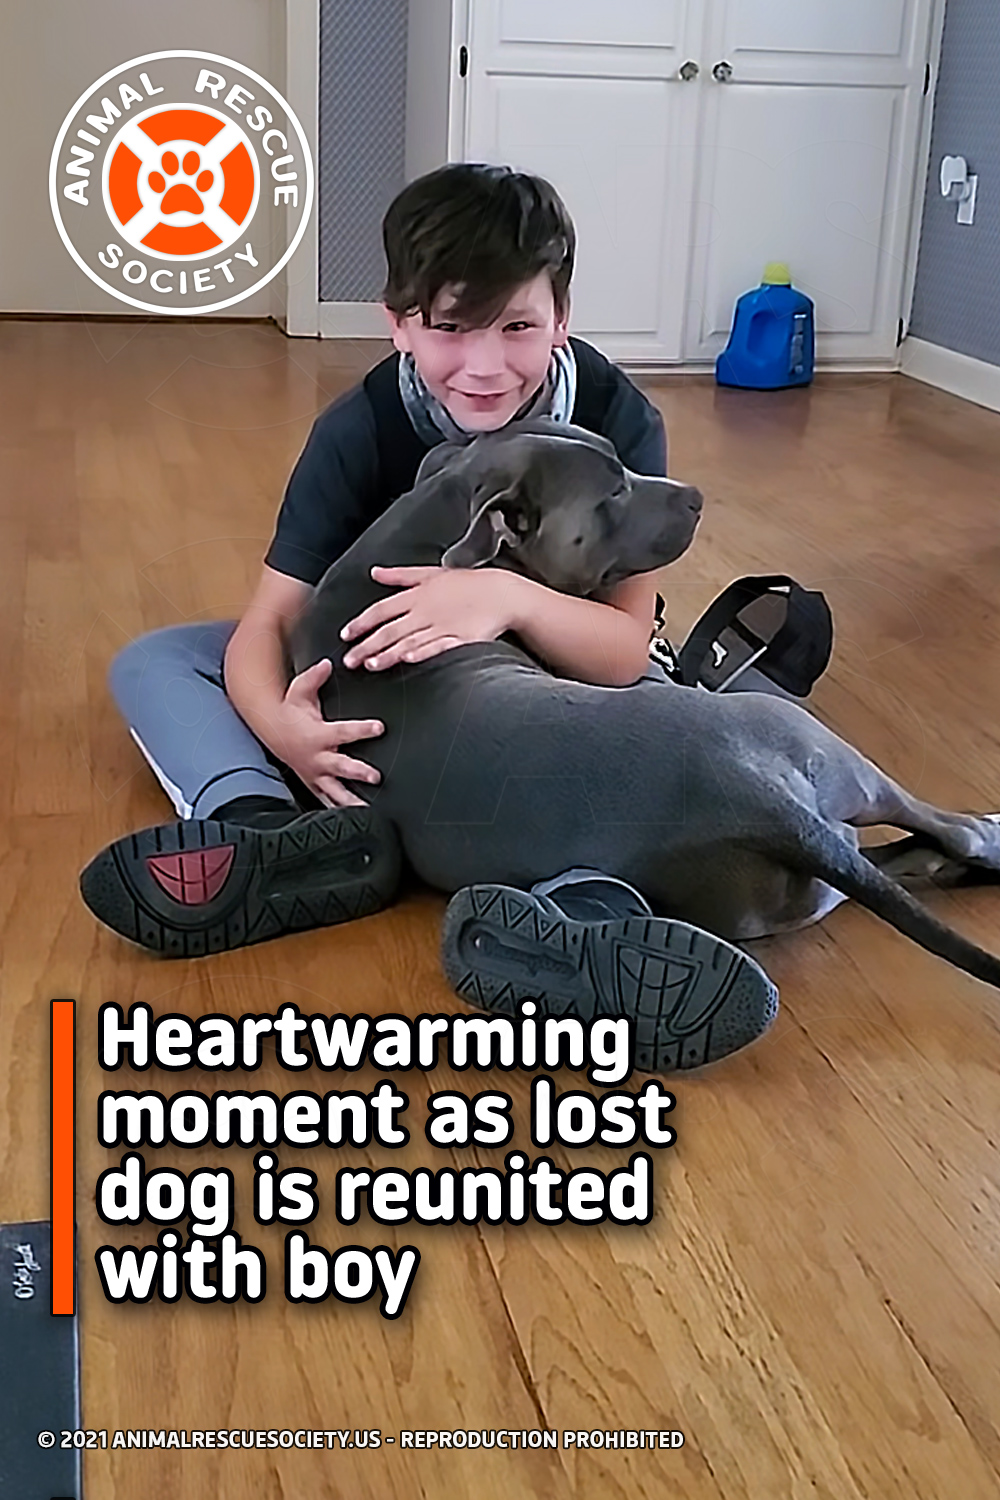 Heartwarming moment as lost dog is reunited with boy